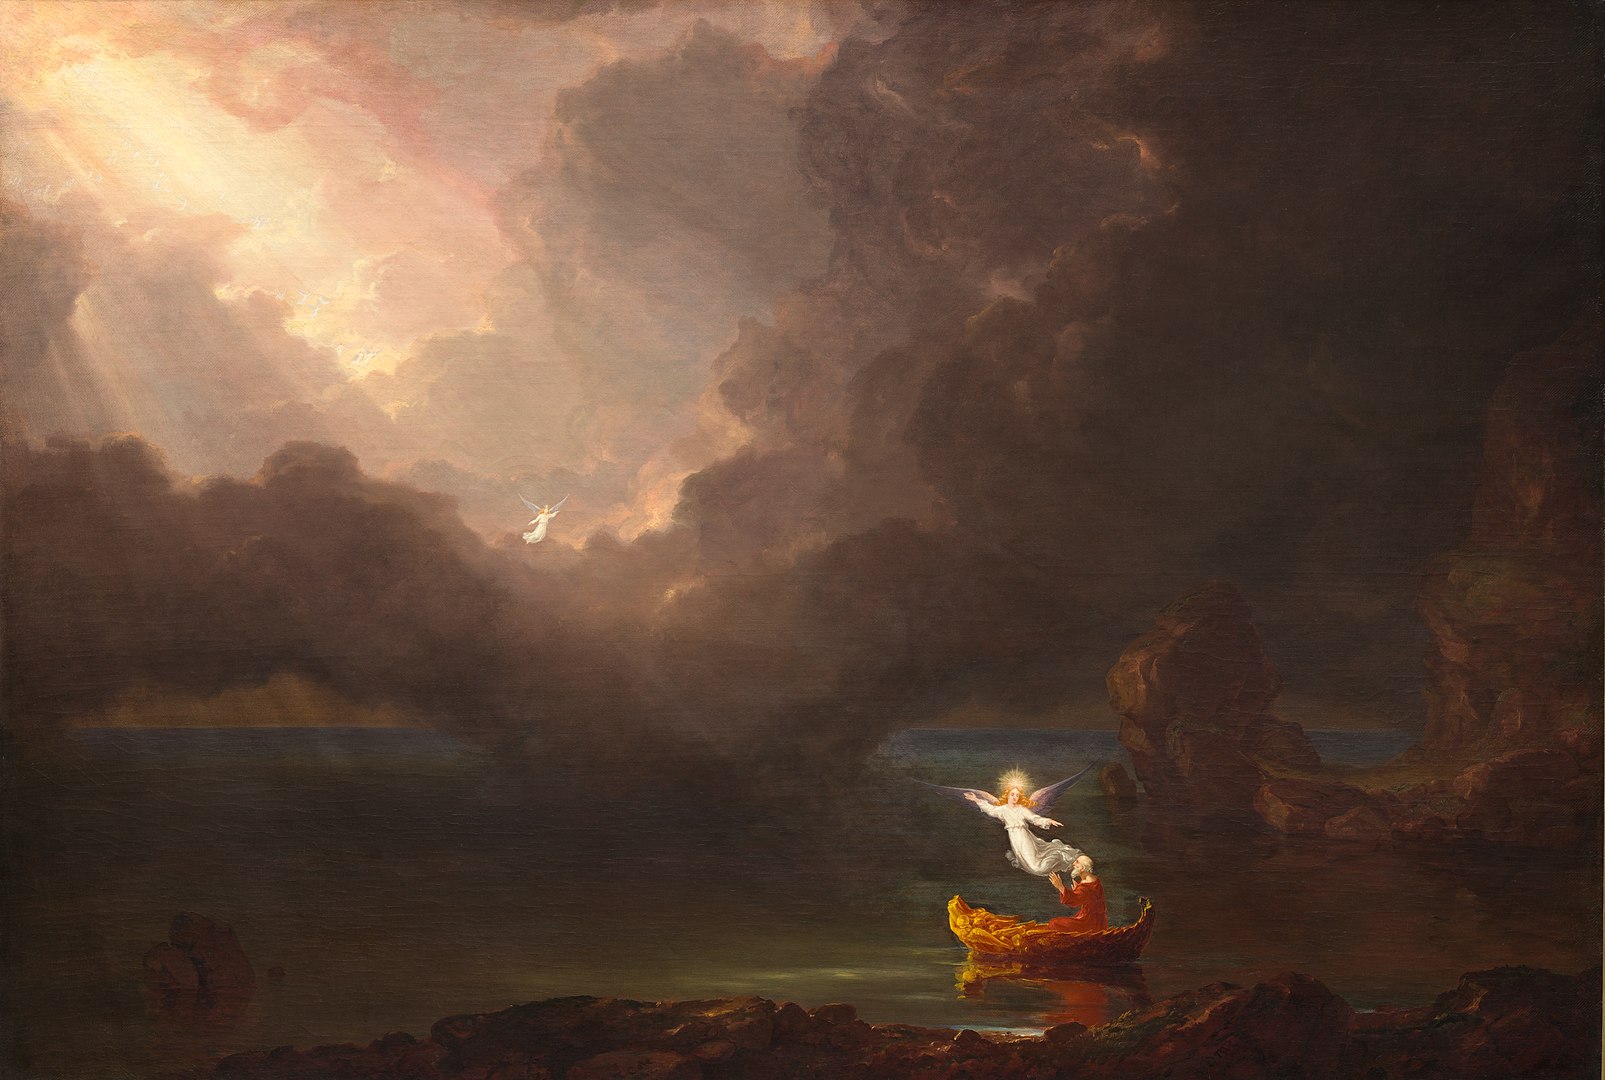 Thomas Cole - The Voyage of Life - Old Age